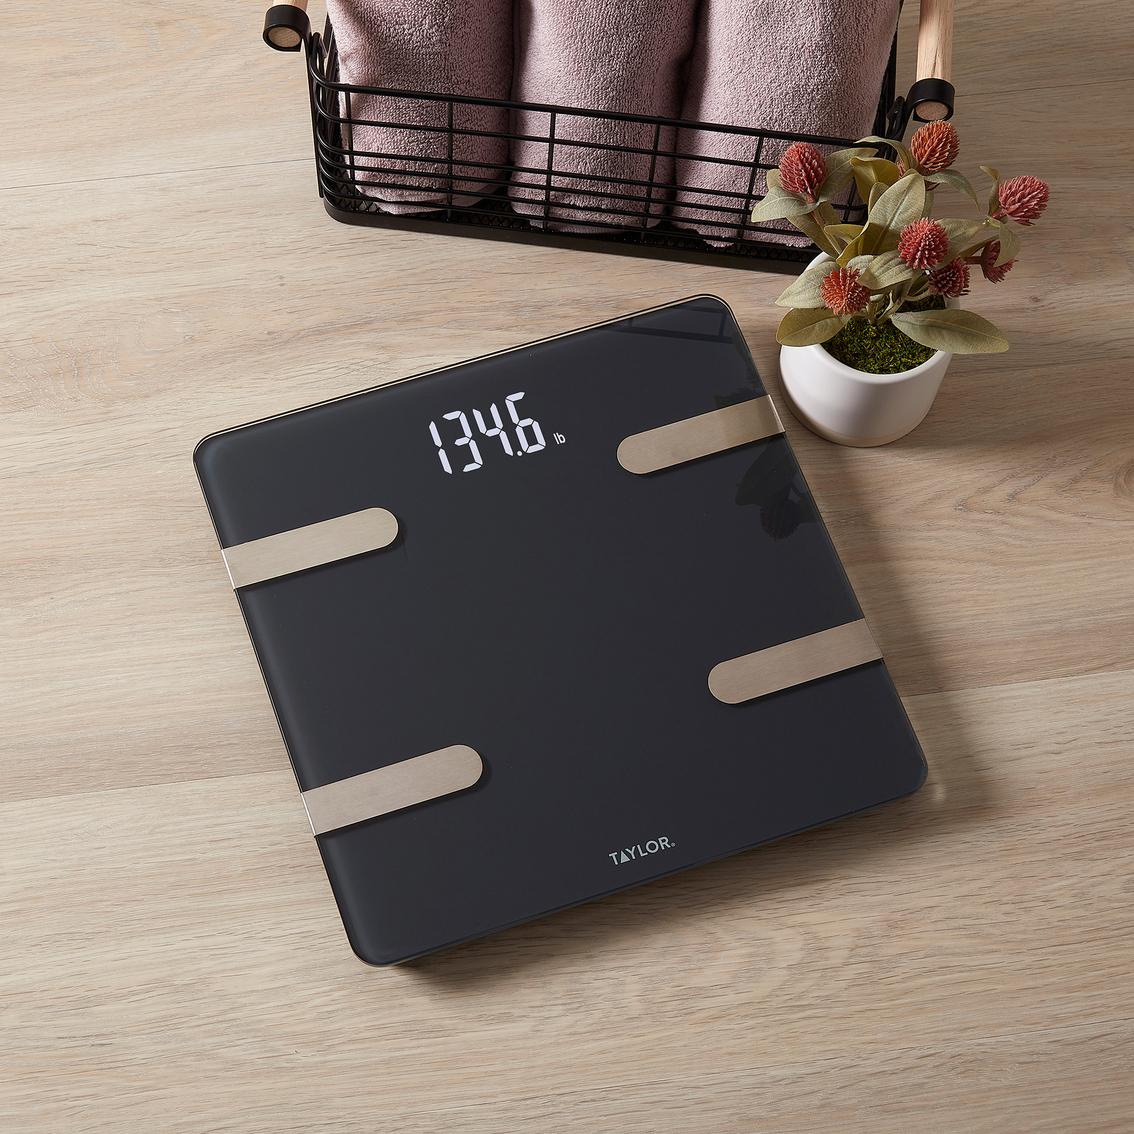 Taylor Bluetooth Body Composition Scale - Image 4 of 5